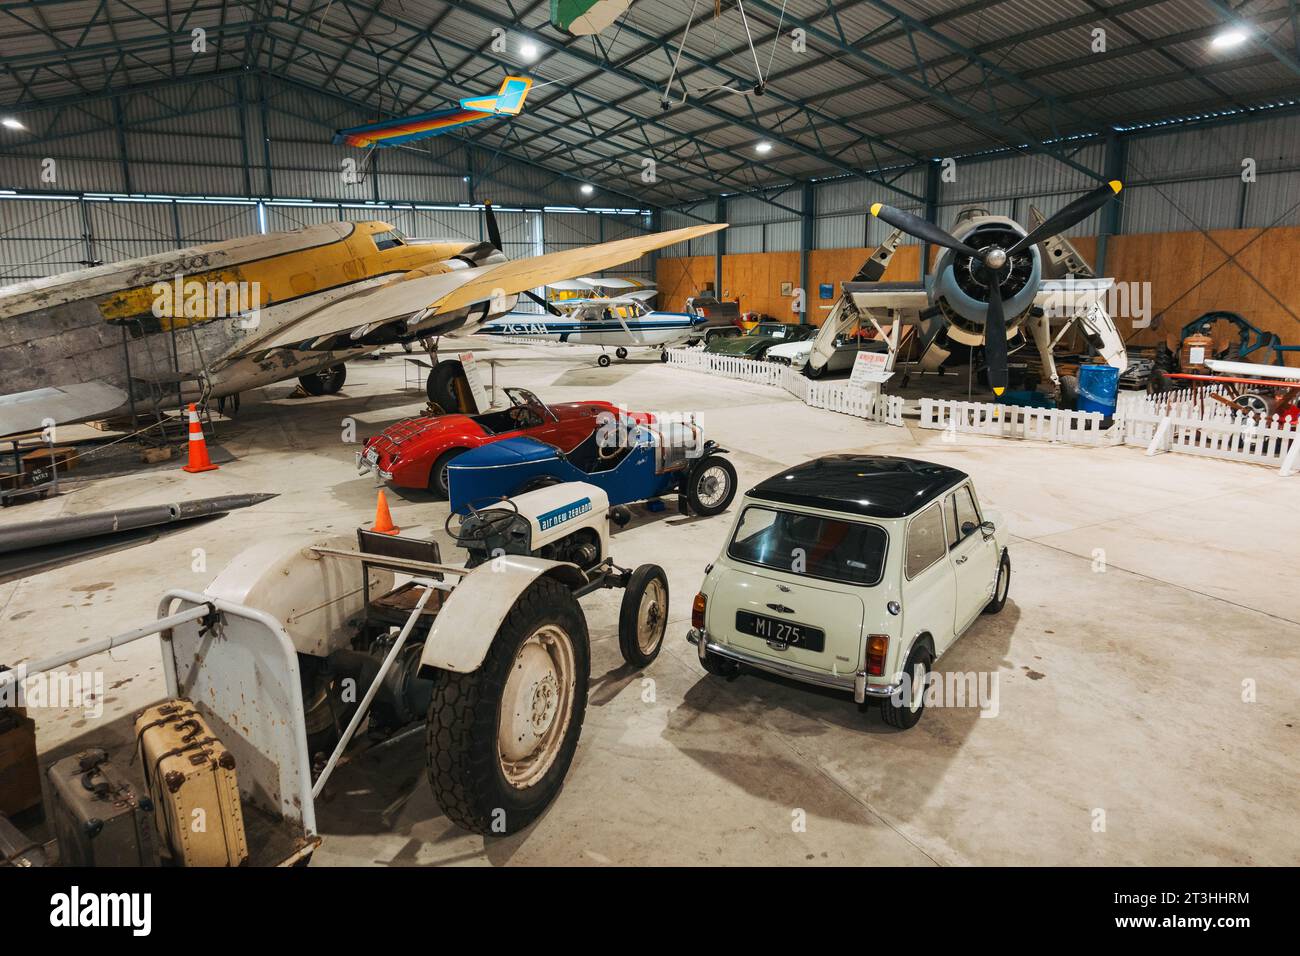 historic aircraft and cars on display at the Tairāwhiti Aviation Museum, Gisborne, New Zealand Stock Photo